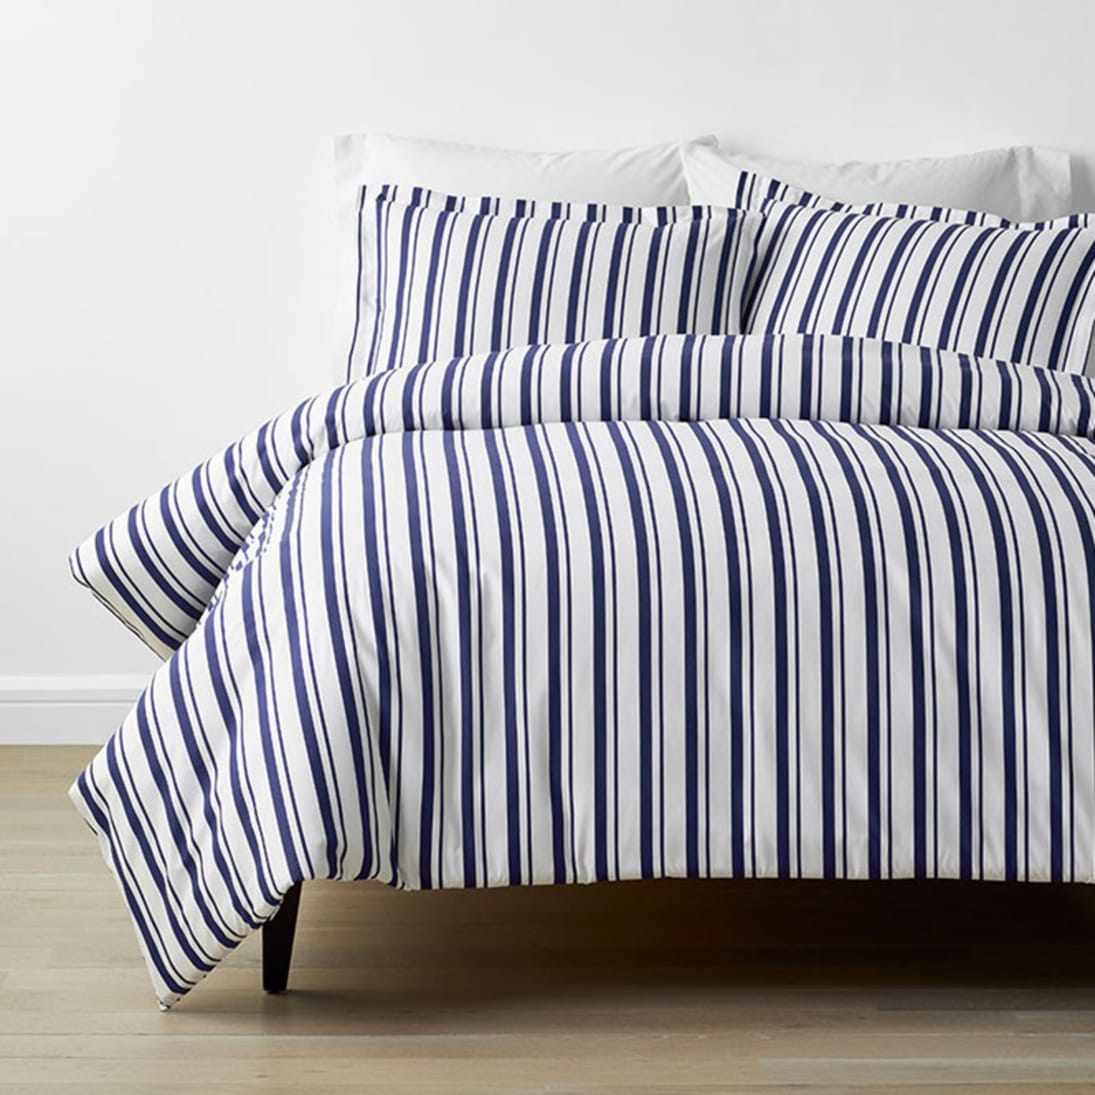 Details about   Cushy Bedding Collection 1000TC Organic Cotton US Twin Size Solid/Striped Colors 